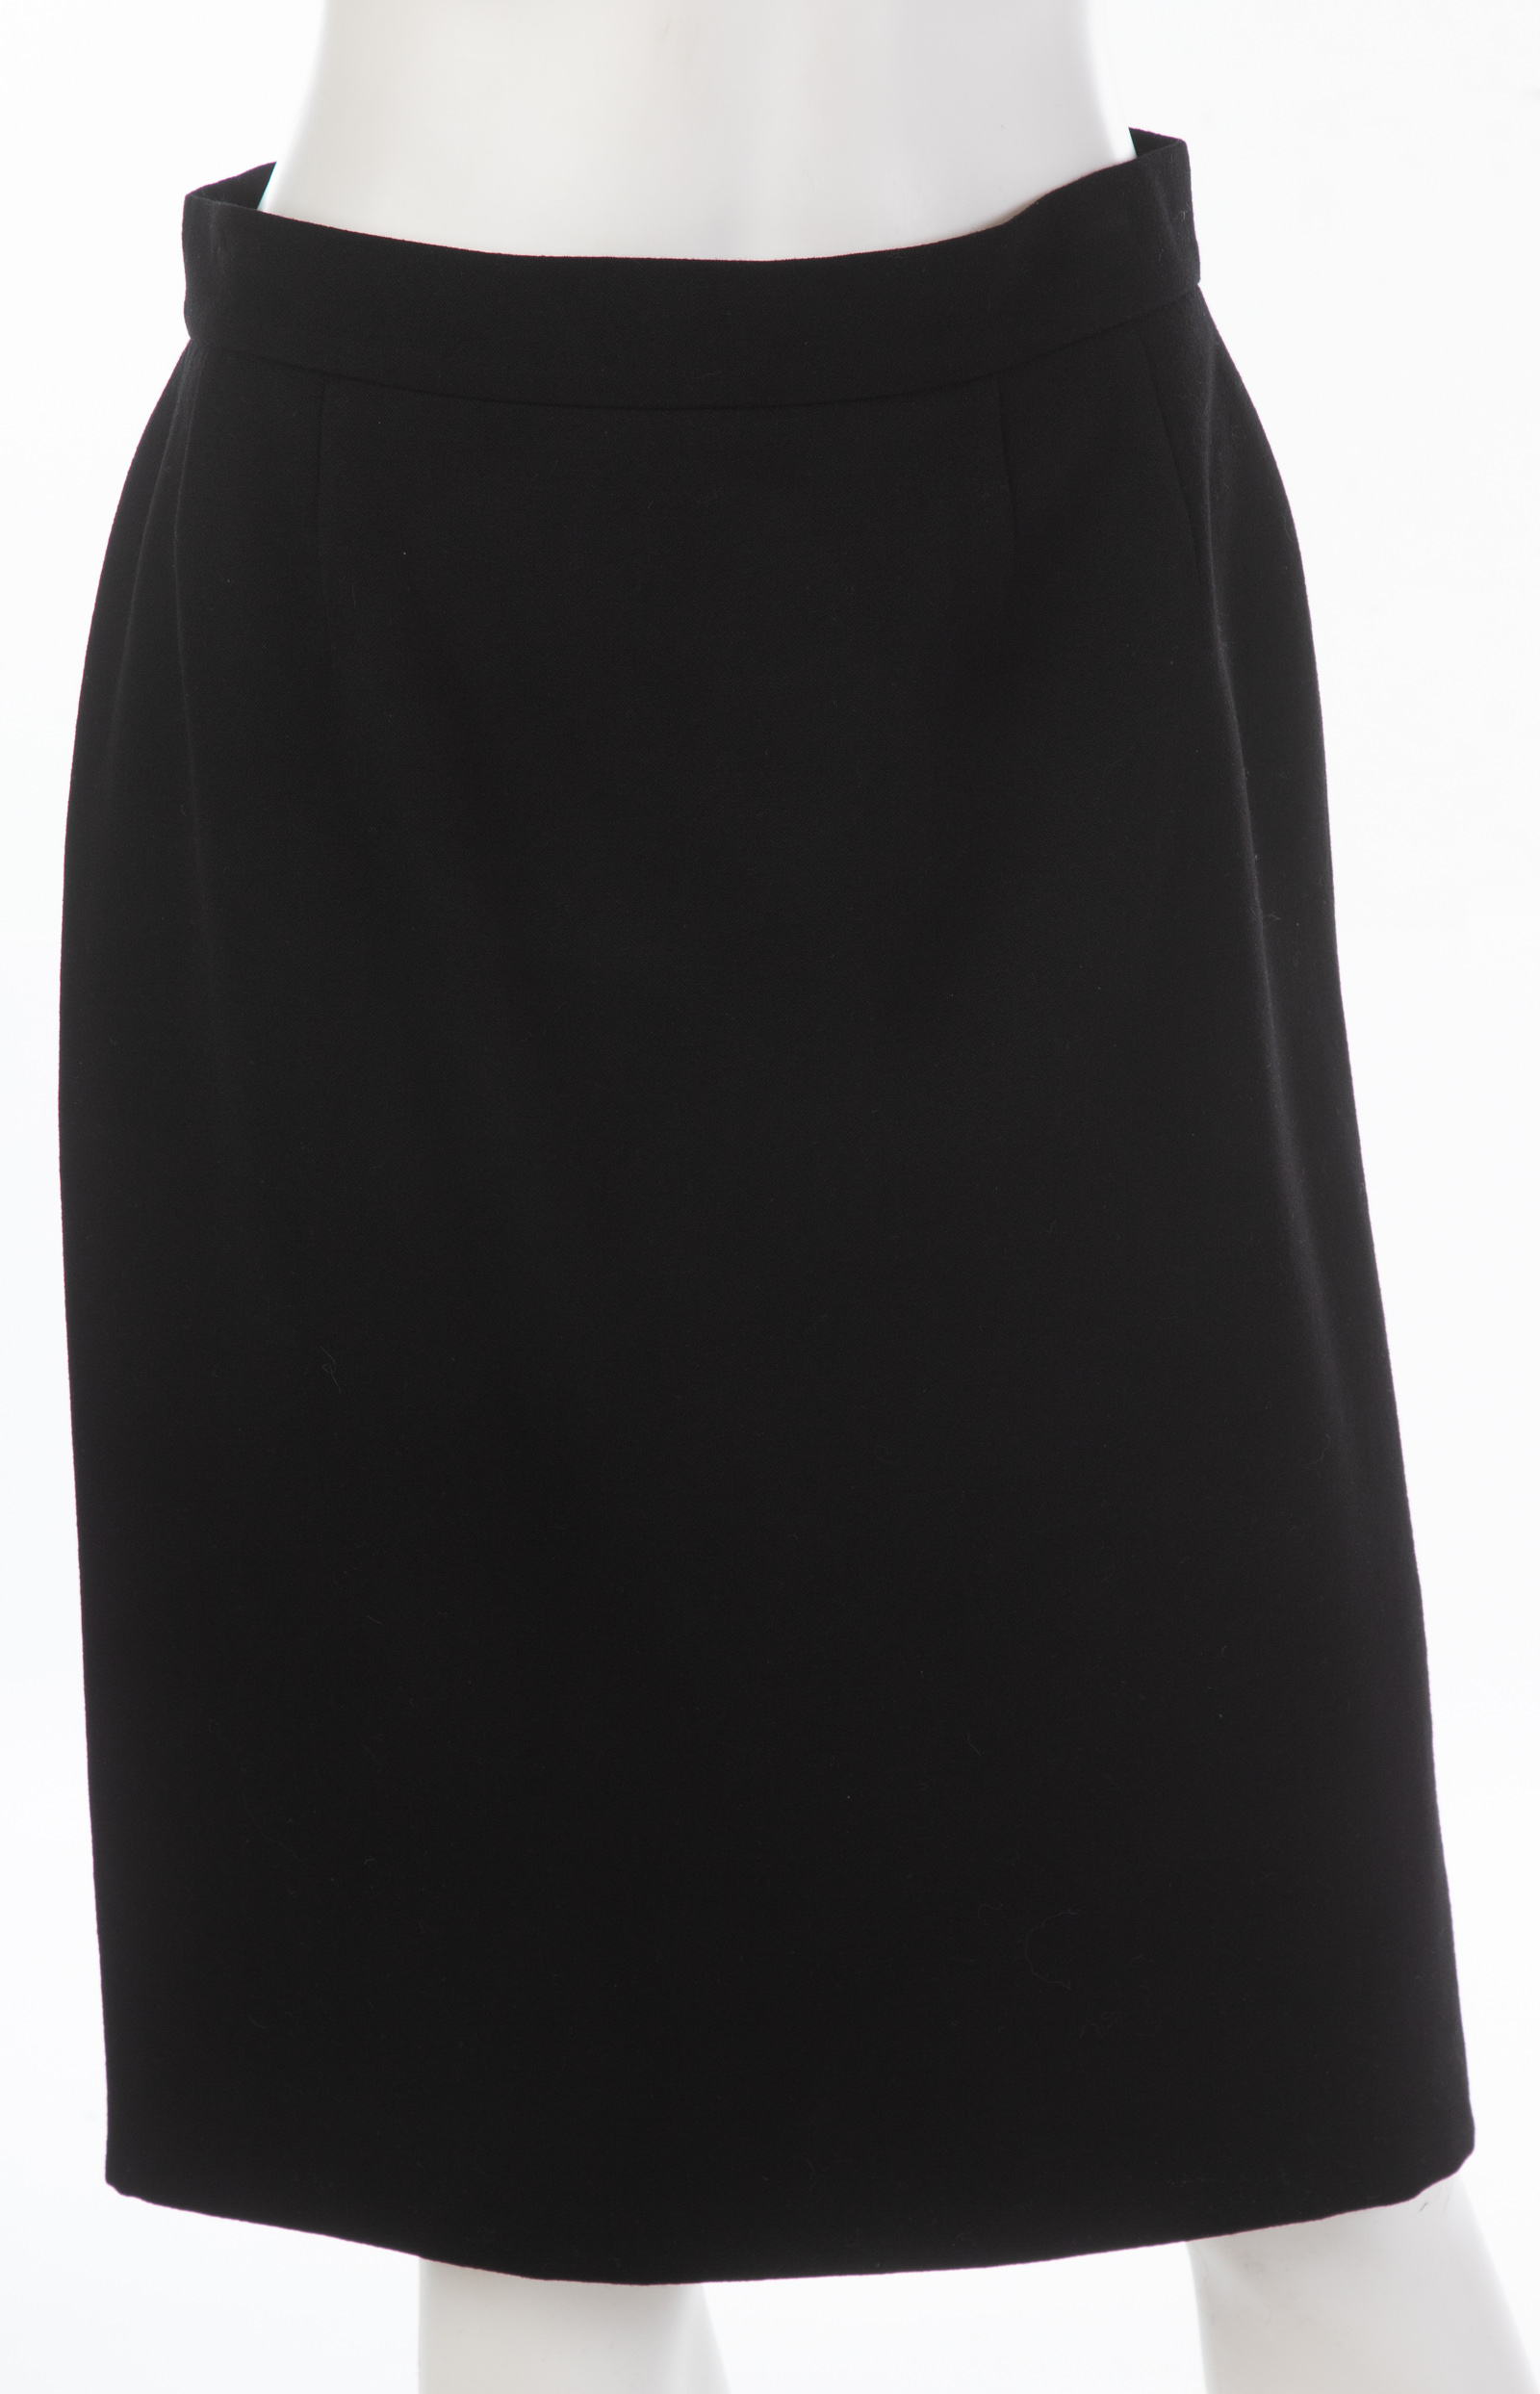 CHANEL BOUTIQUE BLACK WOOL SKIRT 3374bb